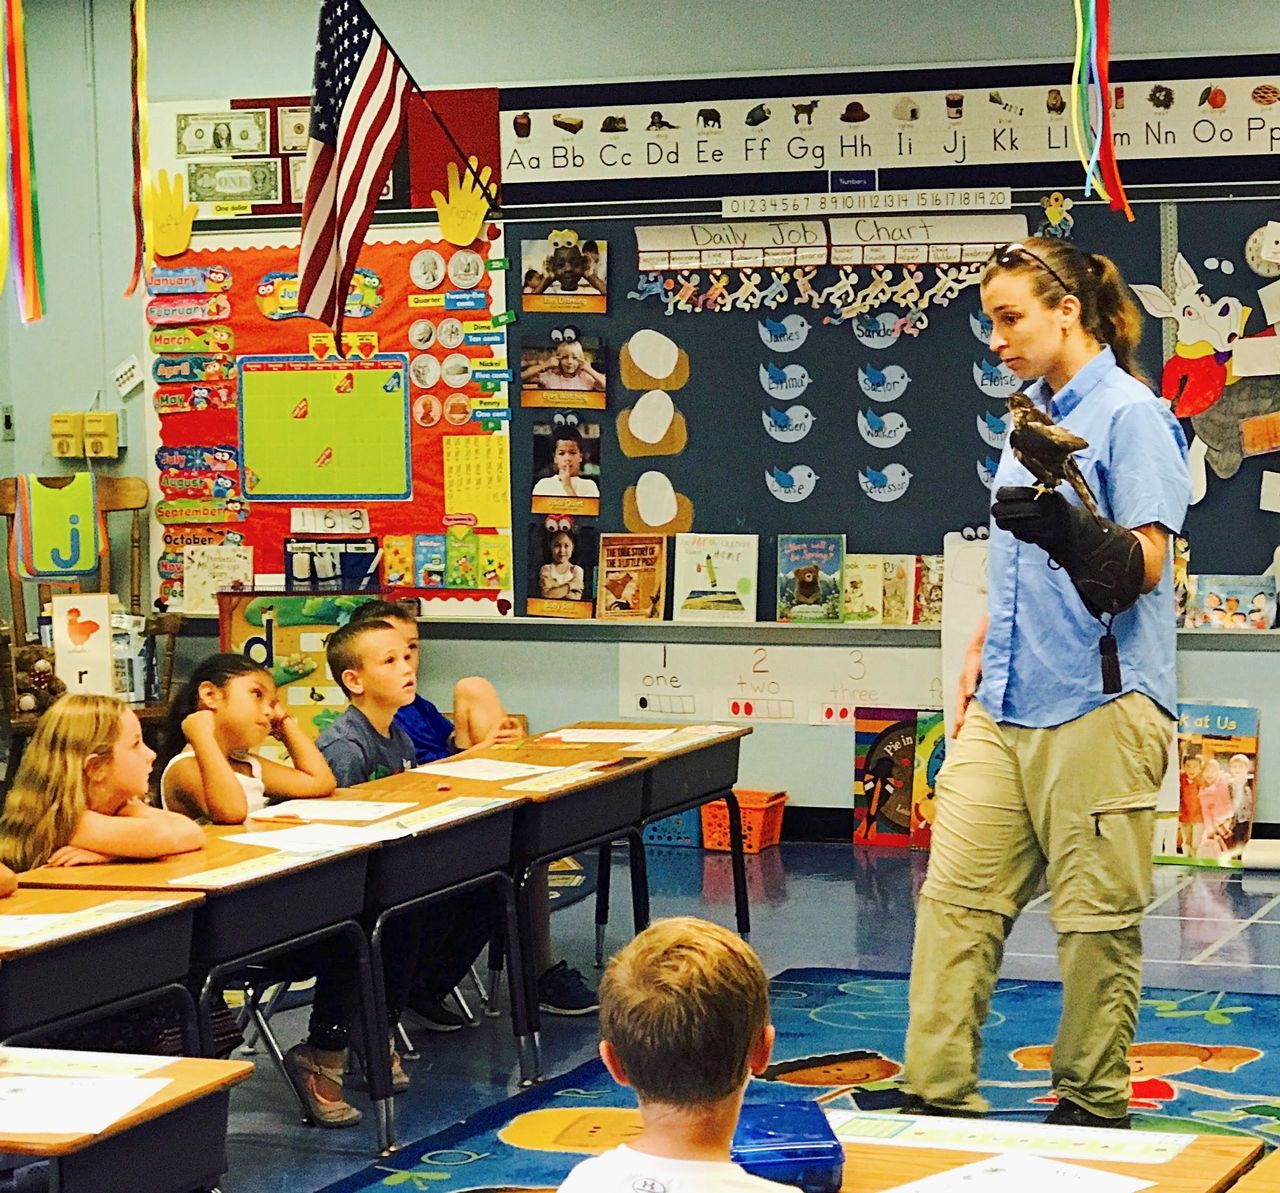 Budnik shares information with a classroom about rehabilitating wild birds.